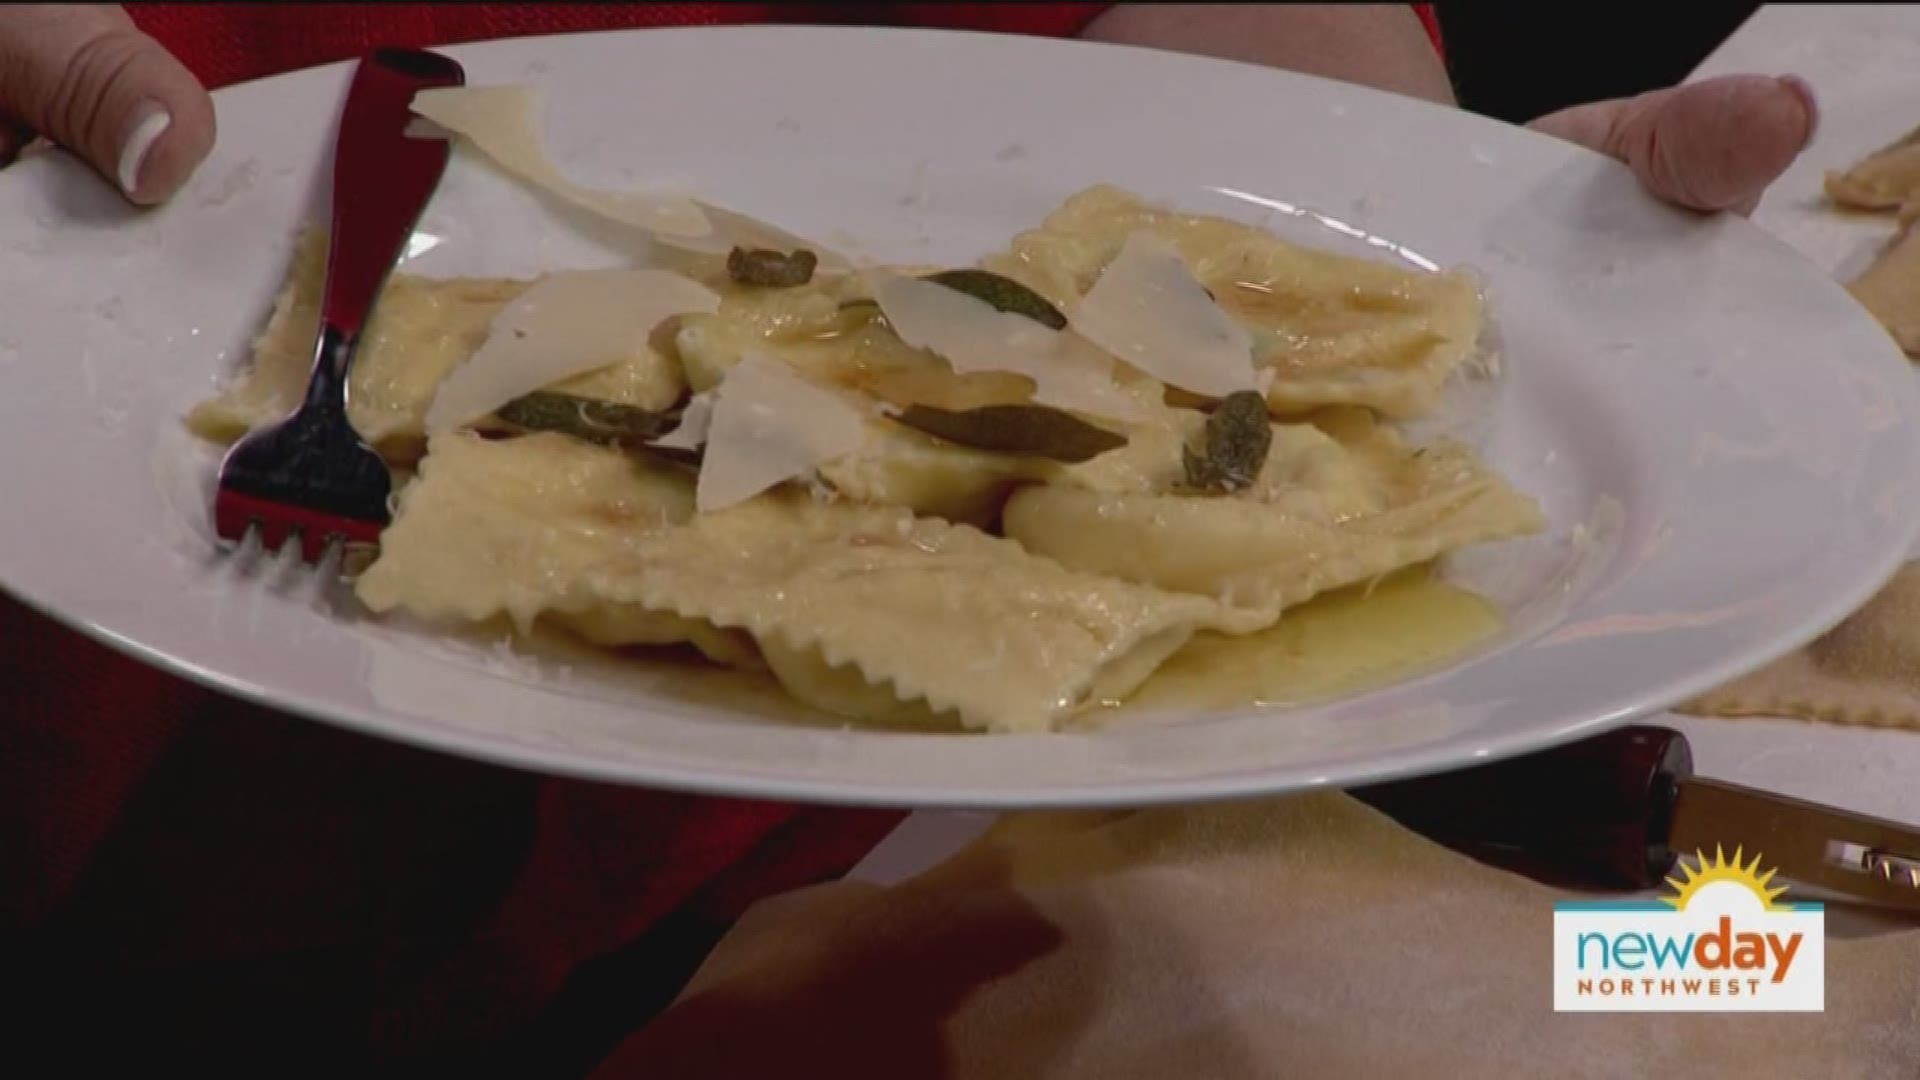 Stuffed pastas like ravioli and tortellini are always a hit, but they're also easy to make.